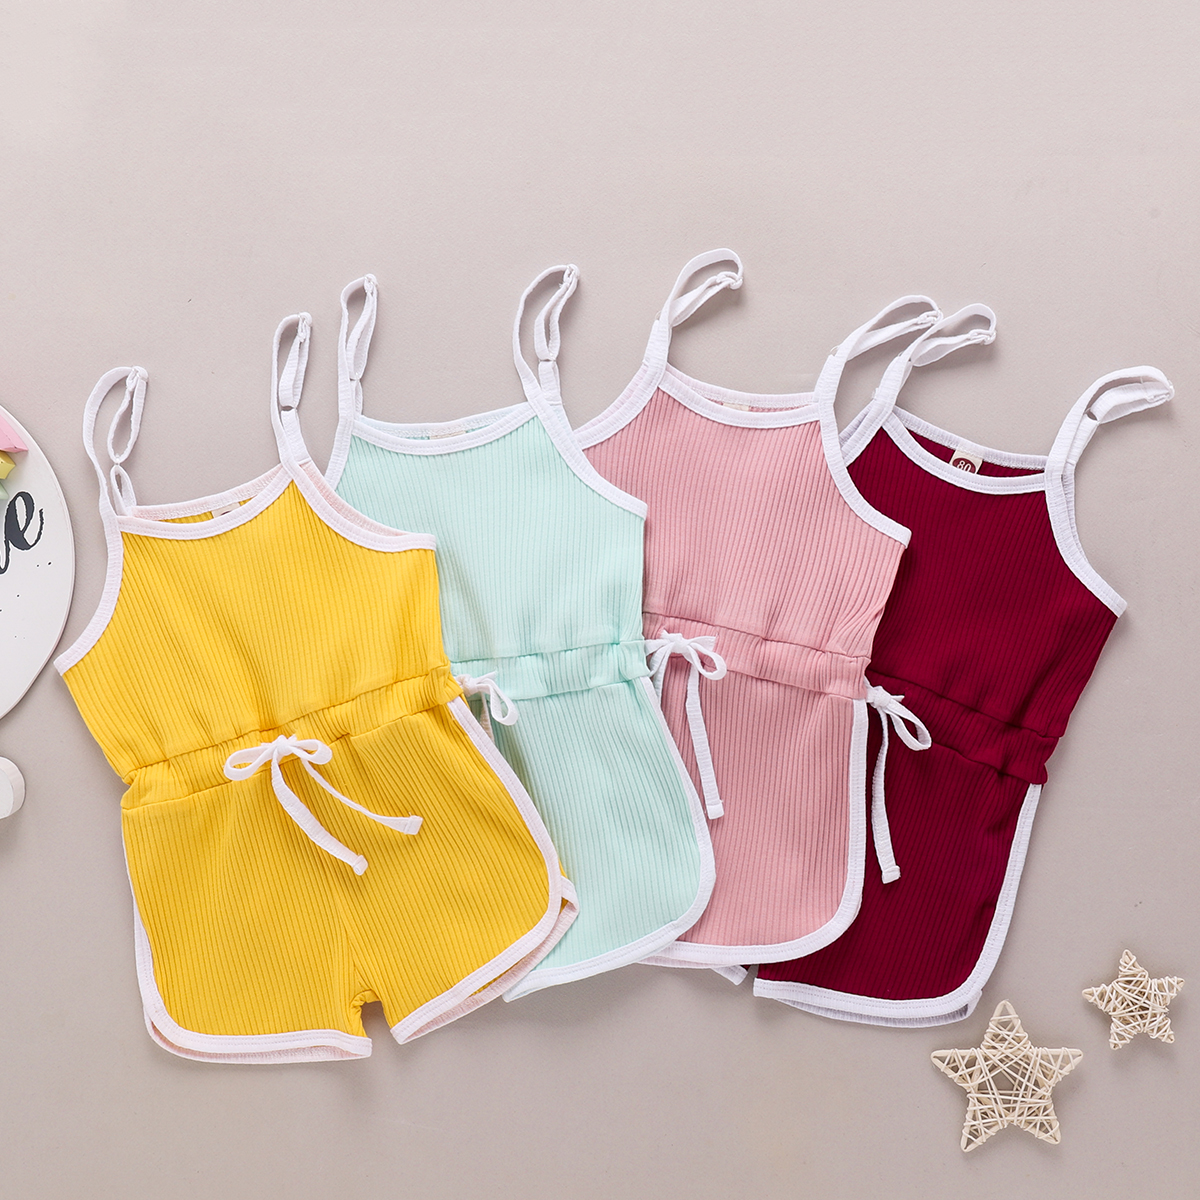 Summer solid color suspender jumpsuit fashion casual simple childrens clothingpicture1